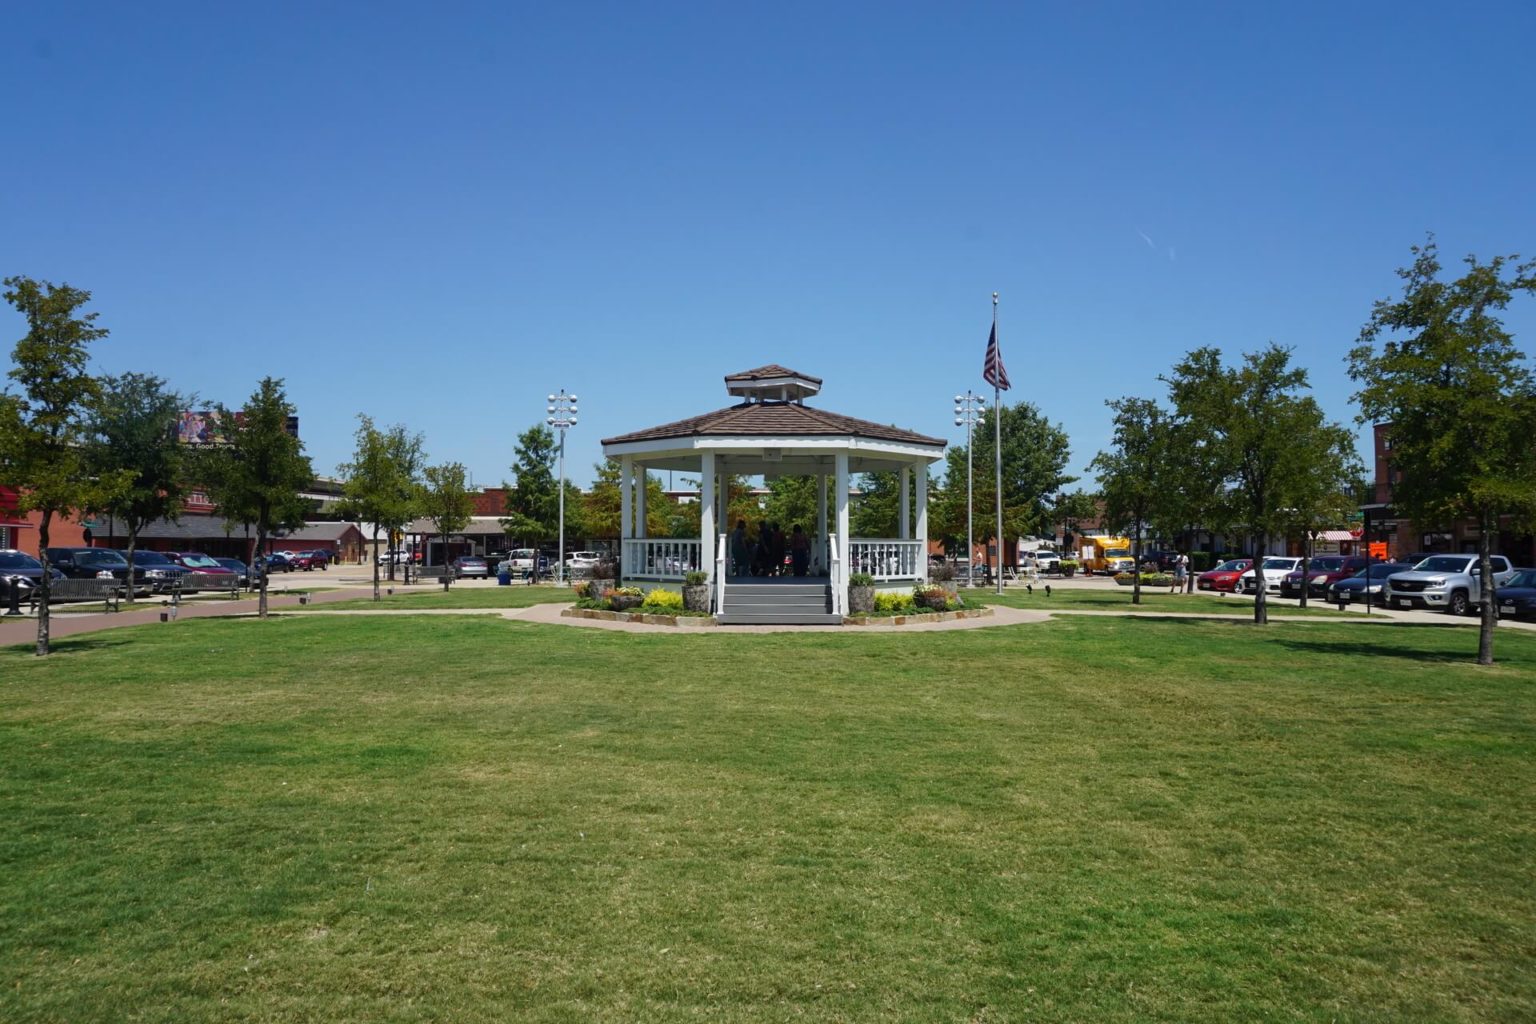 Image of Carrollton city for Carrollton Immigration lawyers